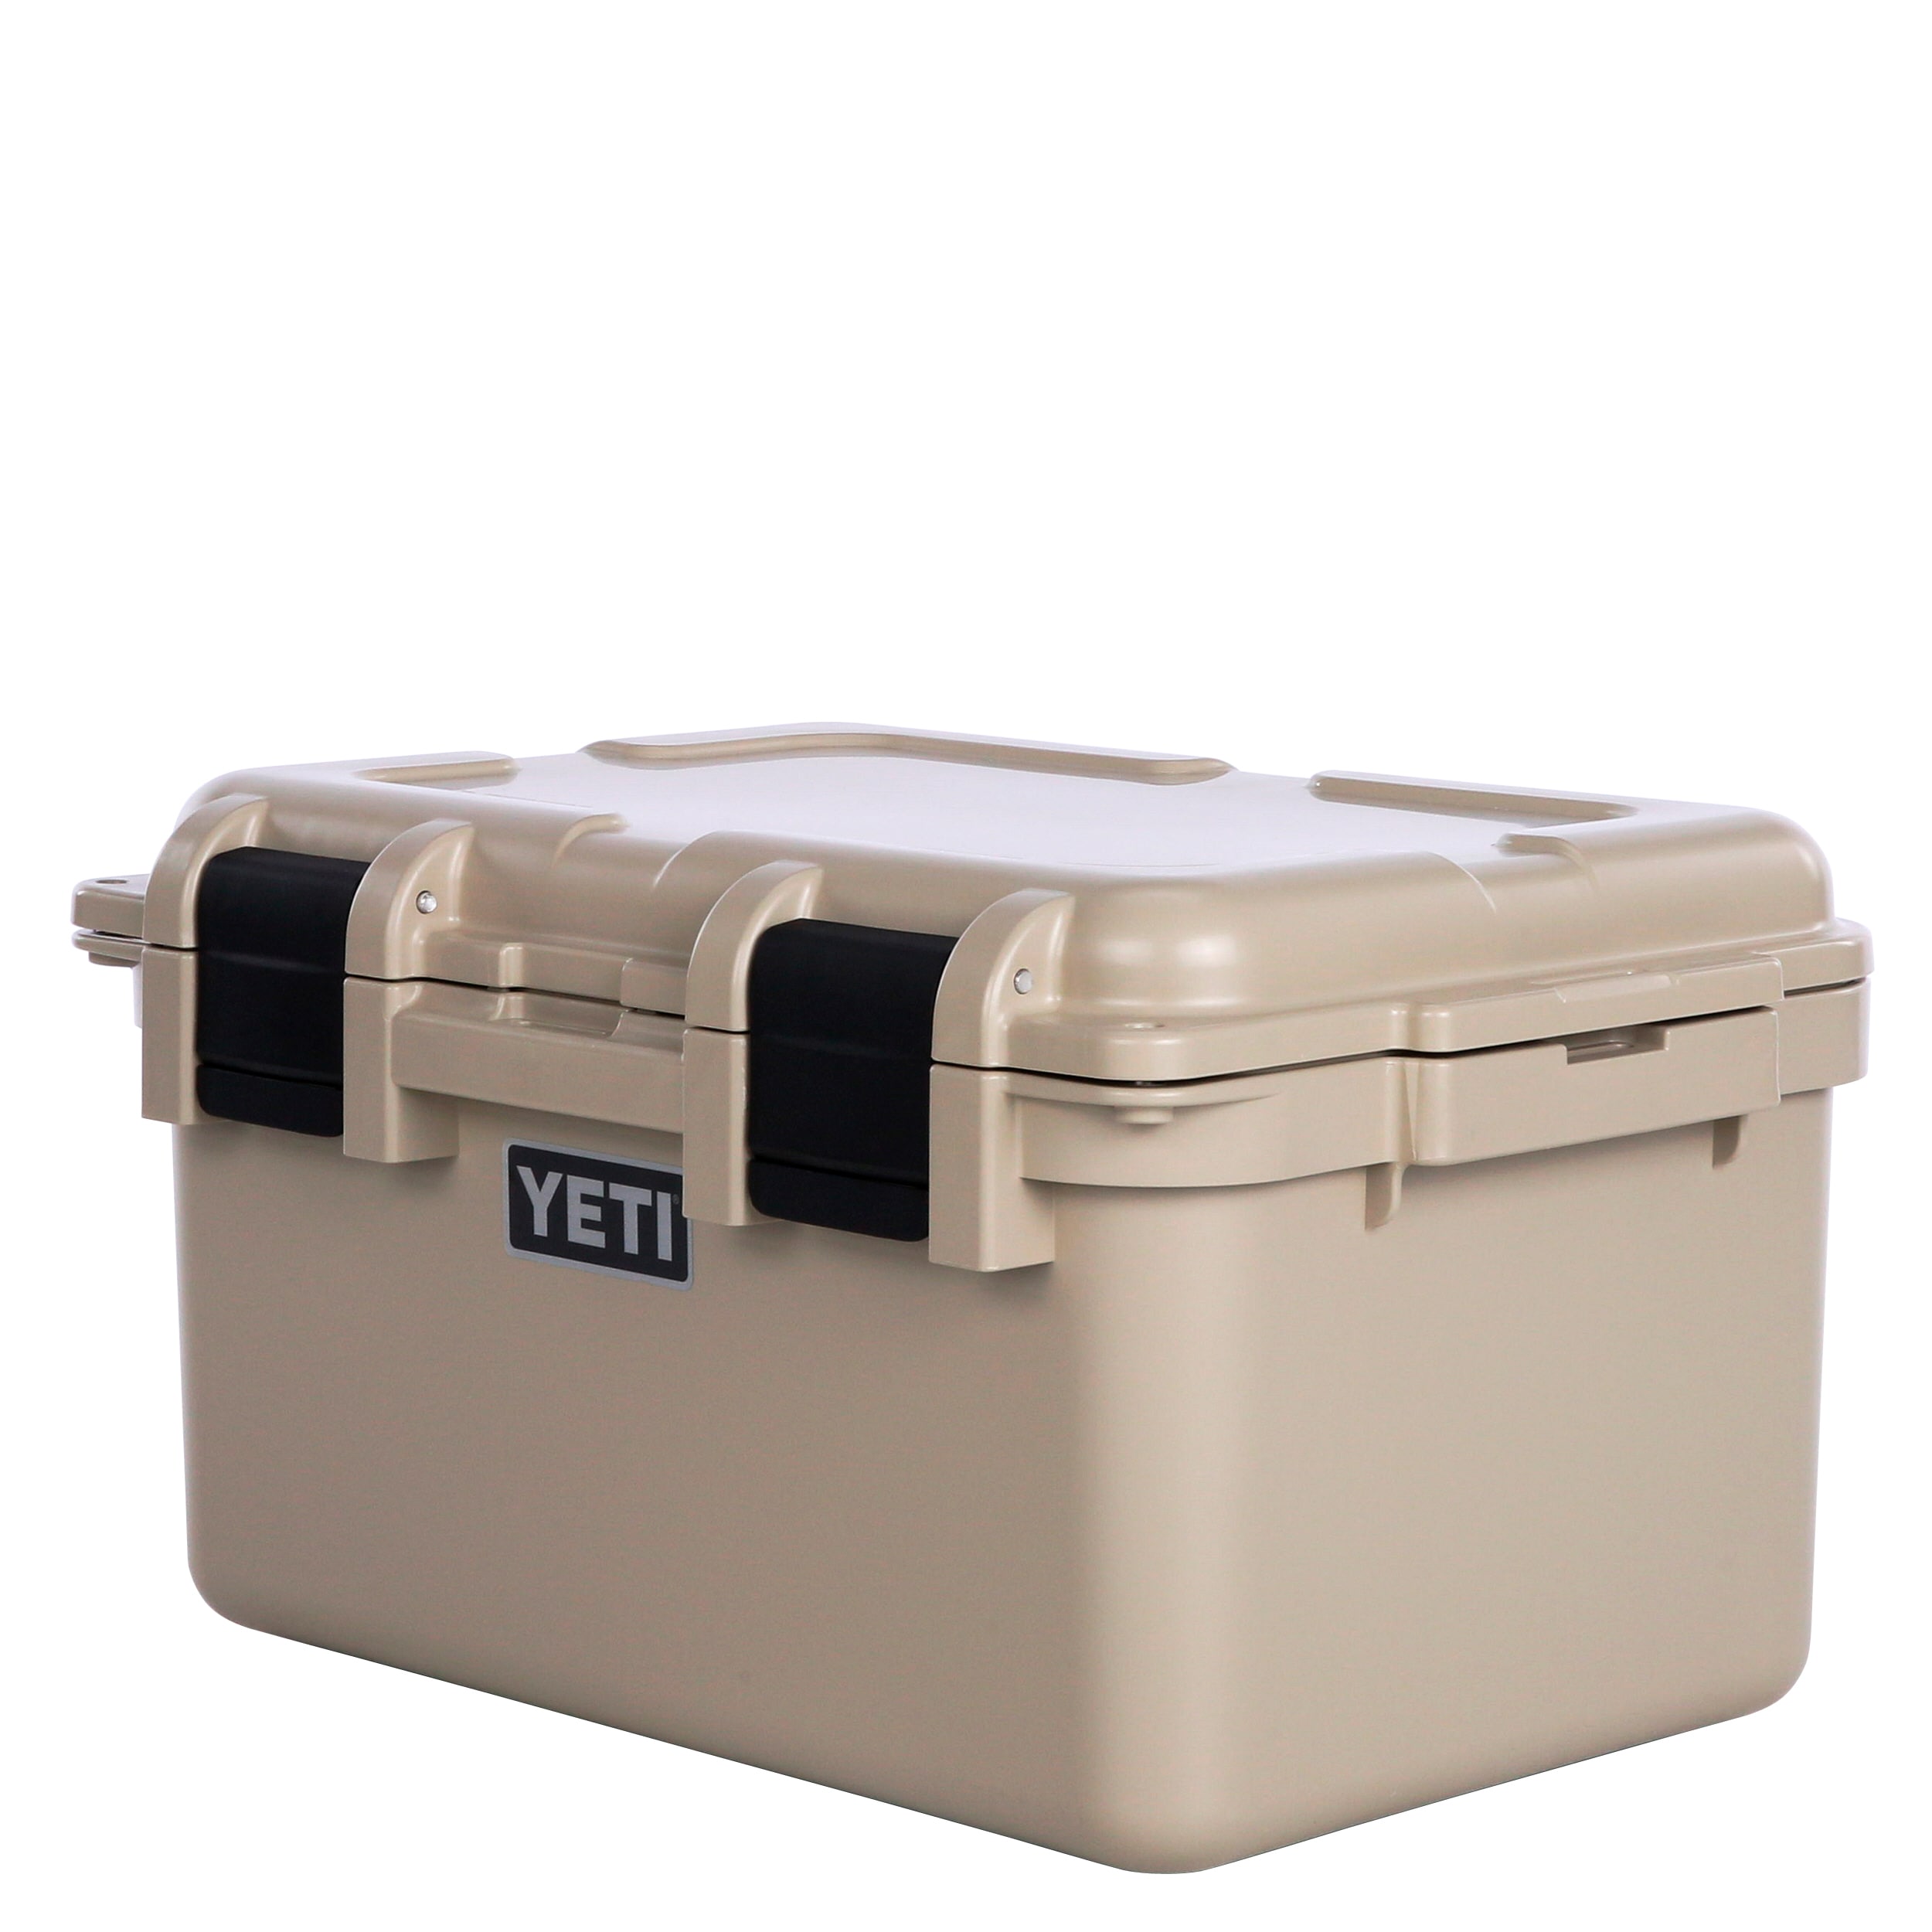 YETI LoadOut GoBox 30: The Brand's All-New Indestructible Storage Box